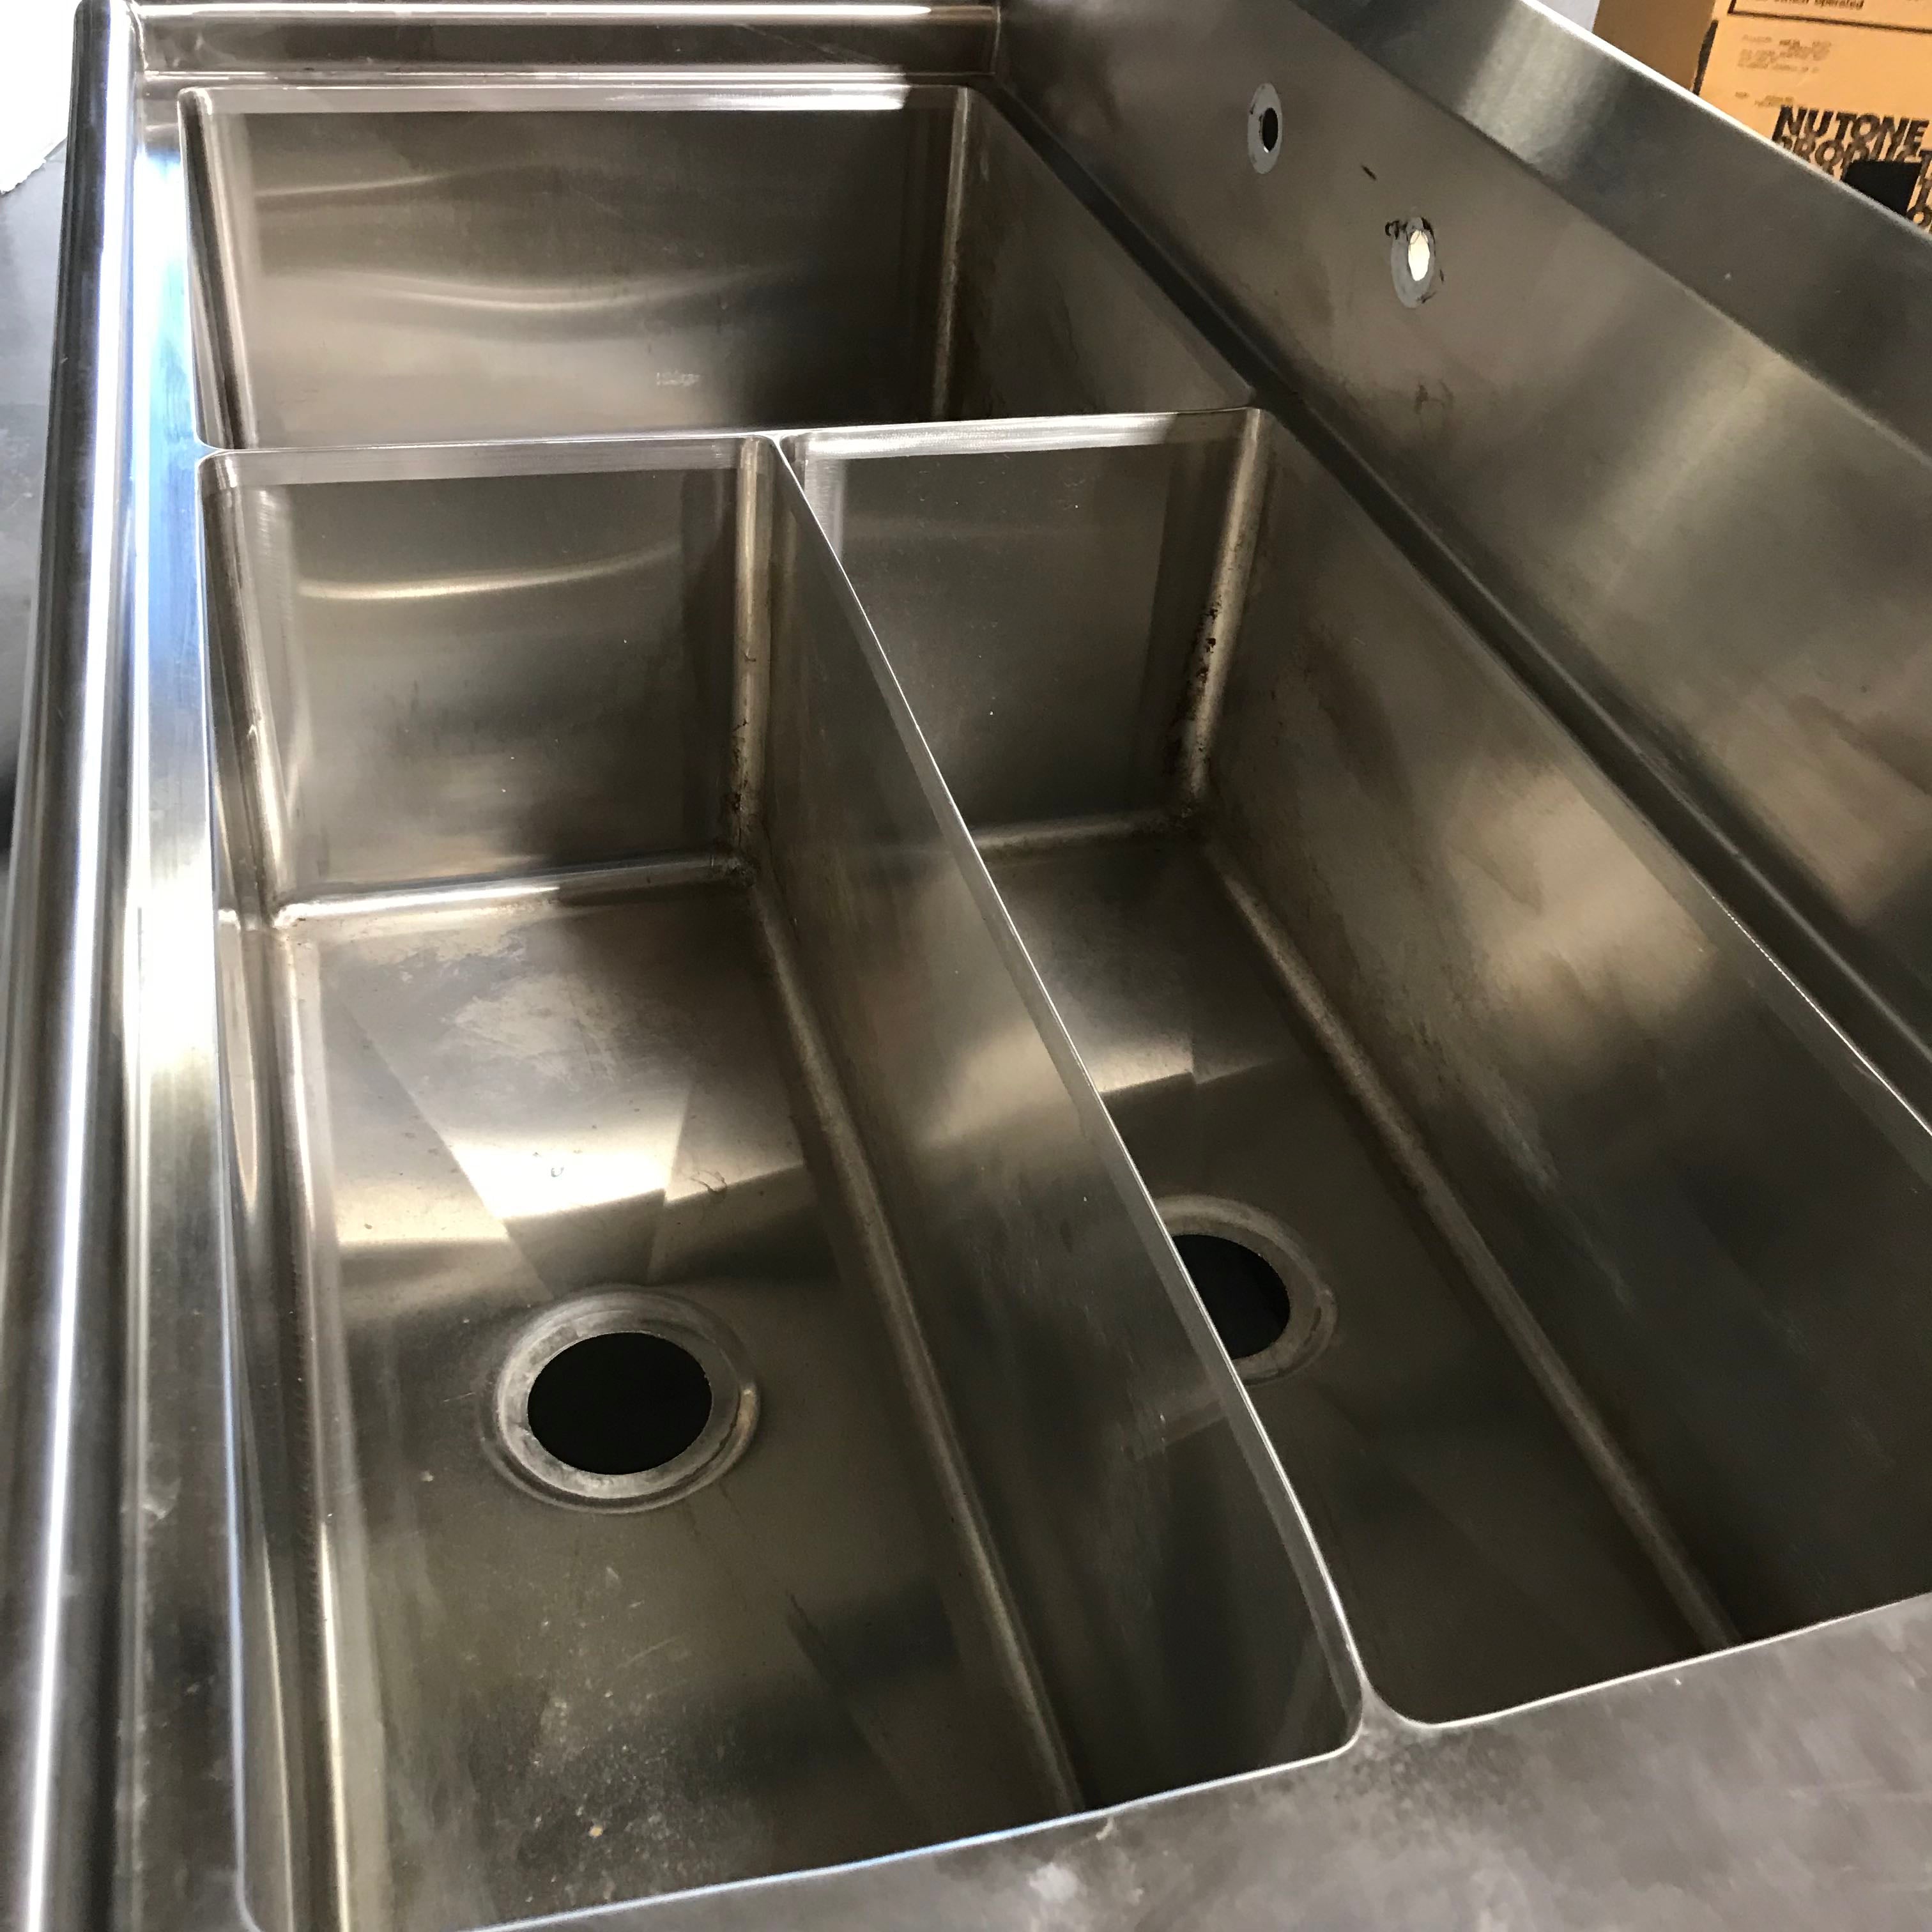 Boos Stainless Steel with Legs Commercial Kitchen Sink